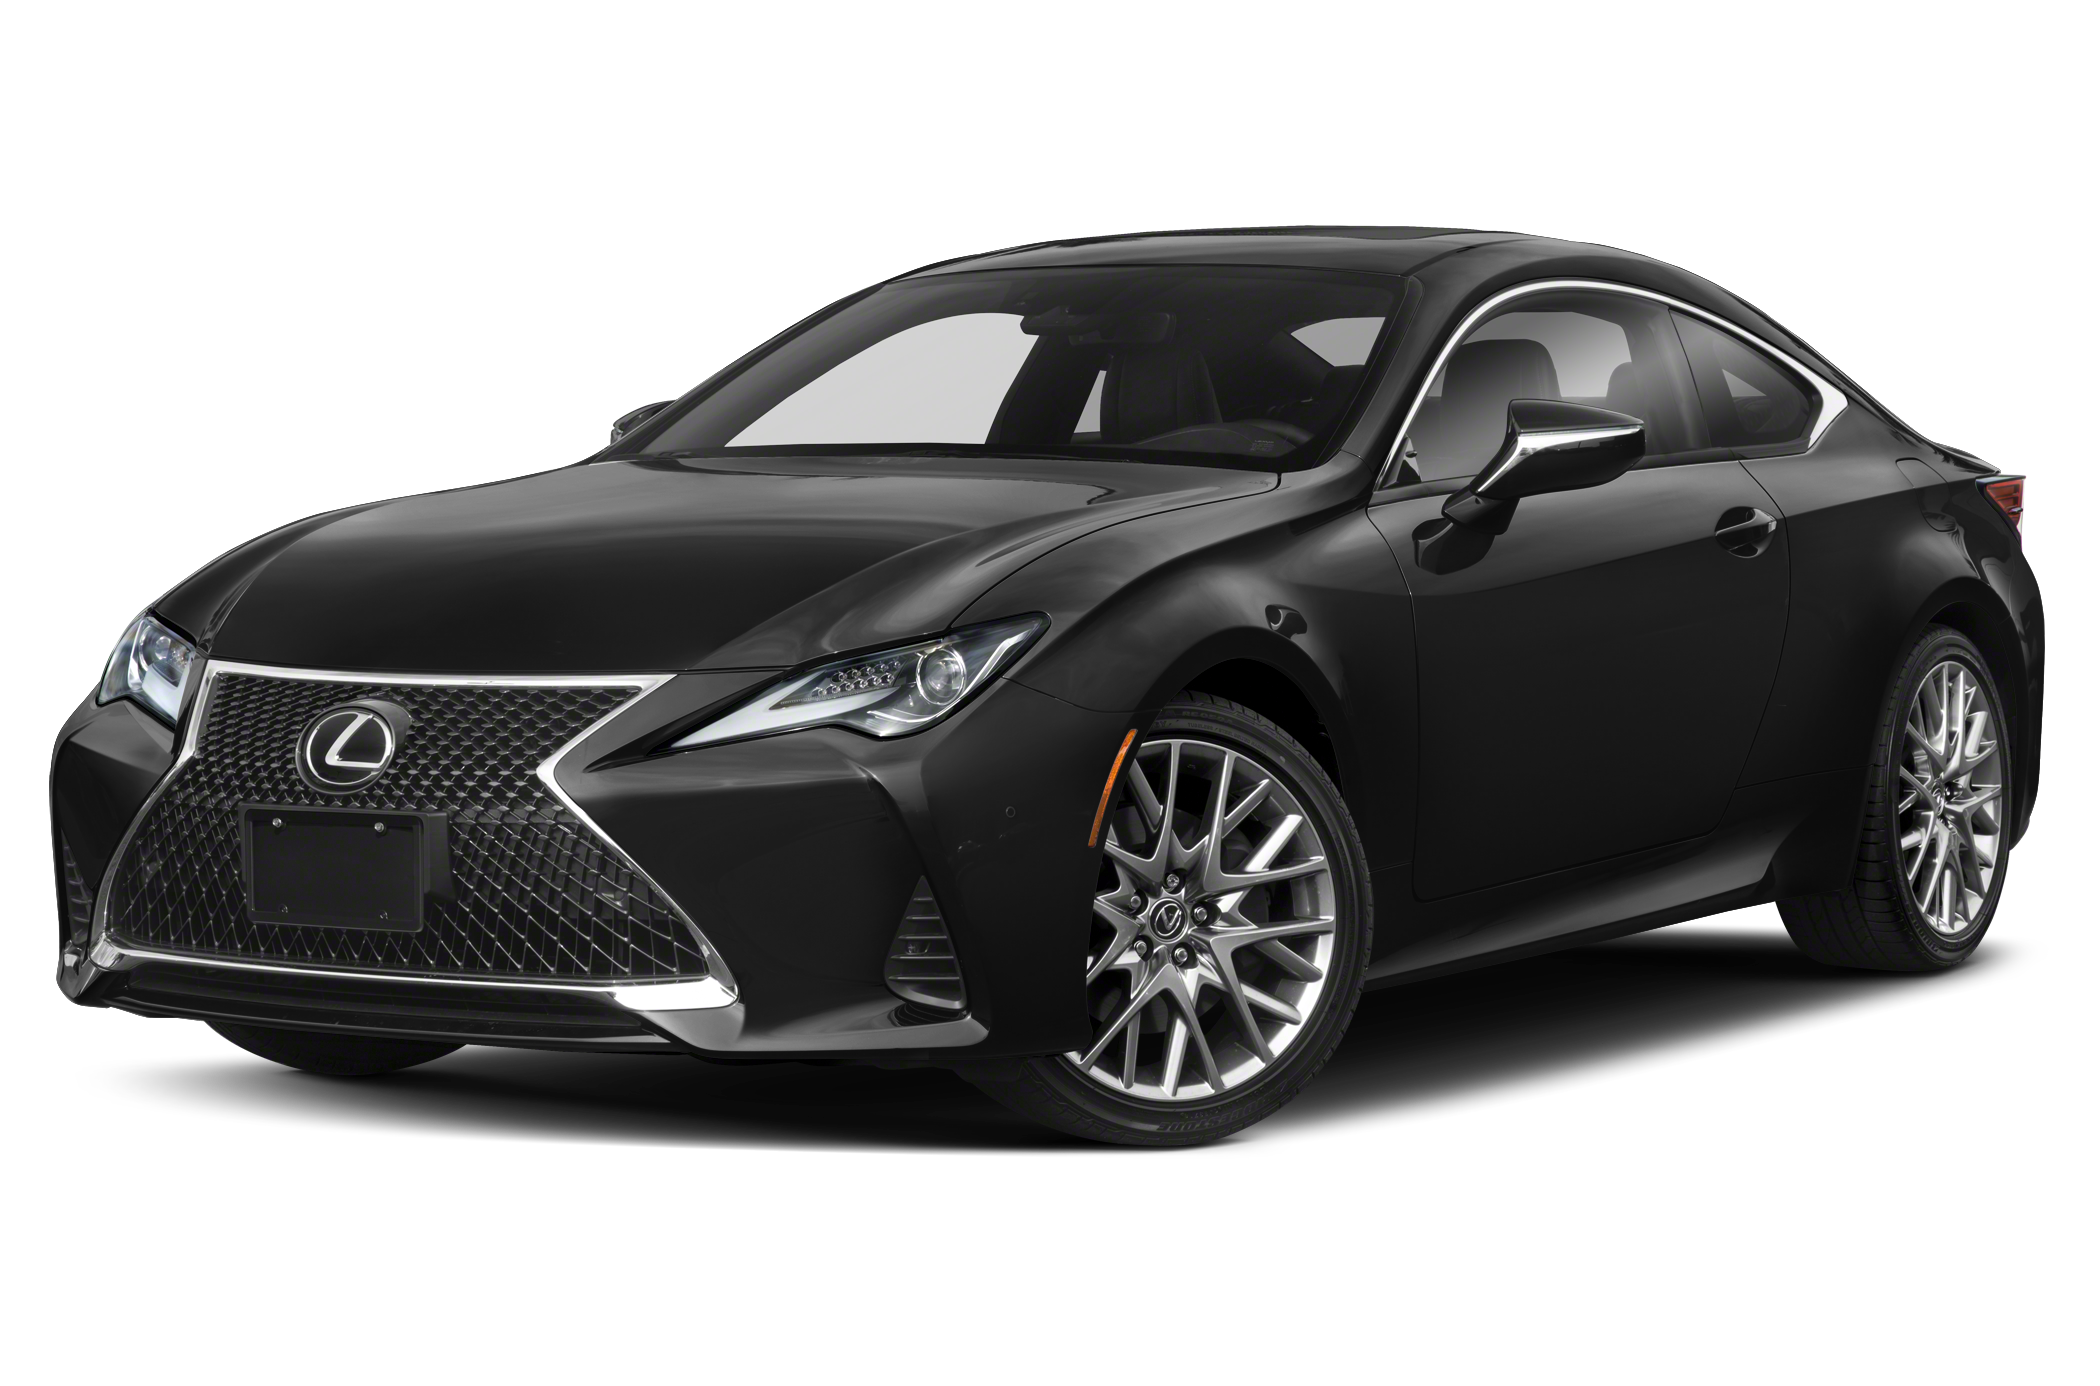 Used 2021 Lexus Rc 350 For Sale Near Me